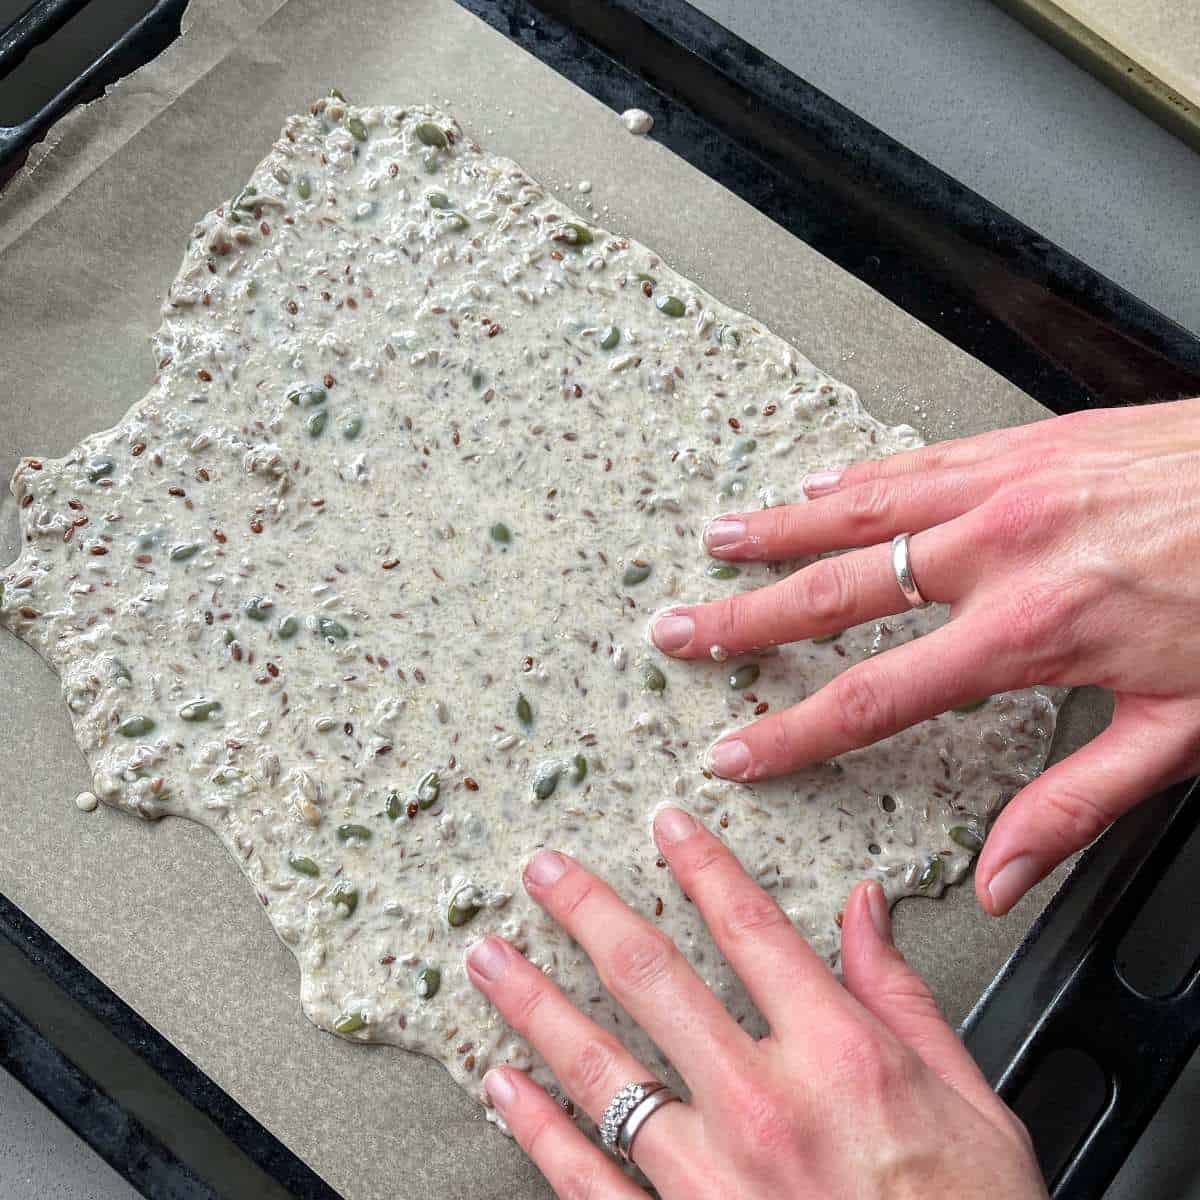 The seeded cracker mixture spread out on an oven tray lined with baking paper